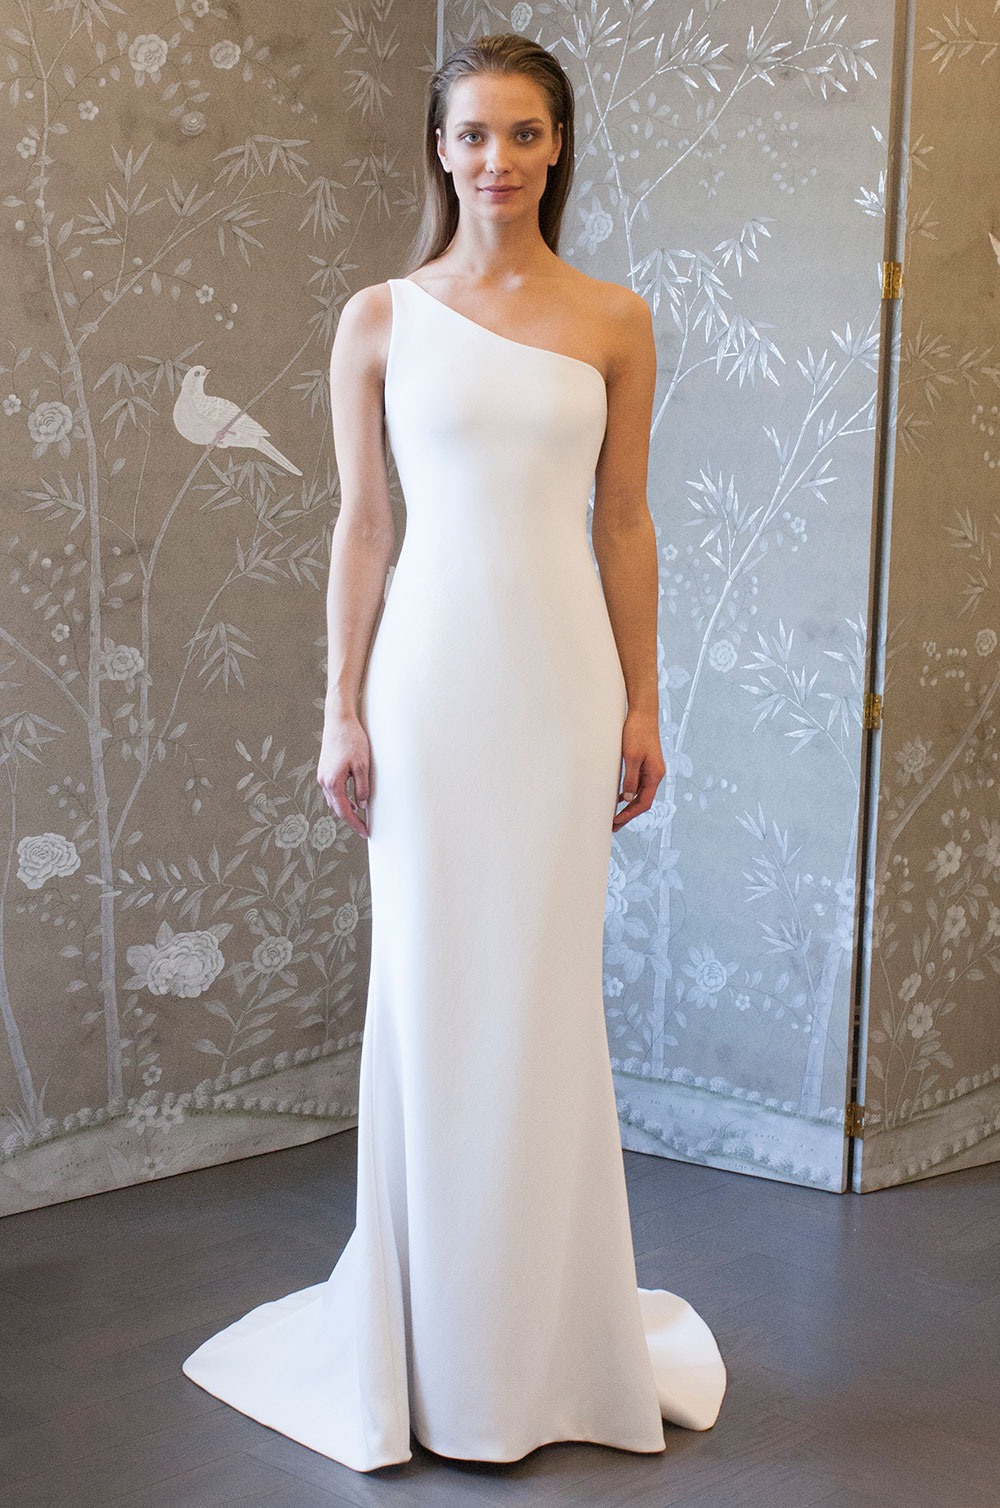 Keep it simple, sweetheart: Dress inspiration for the minimalist bride ...